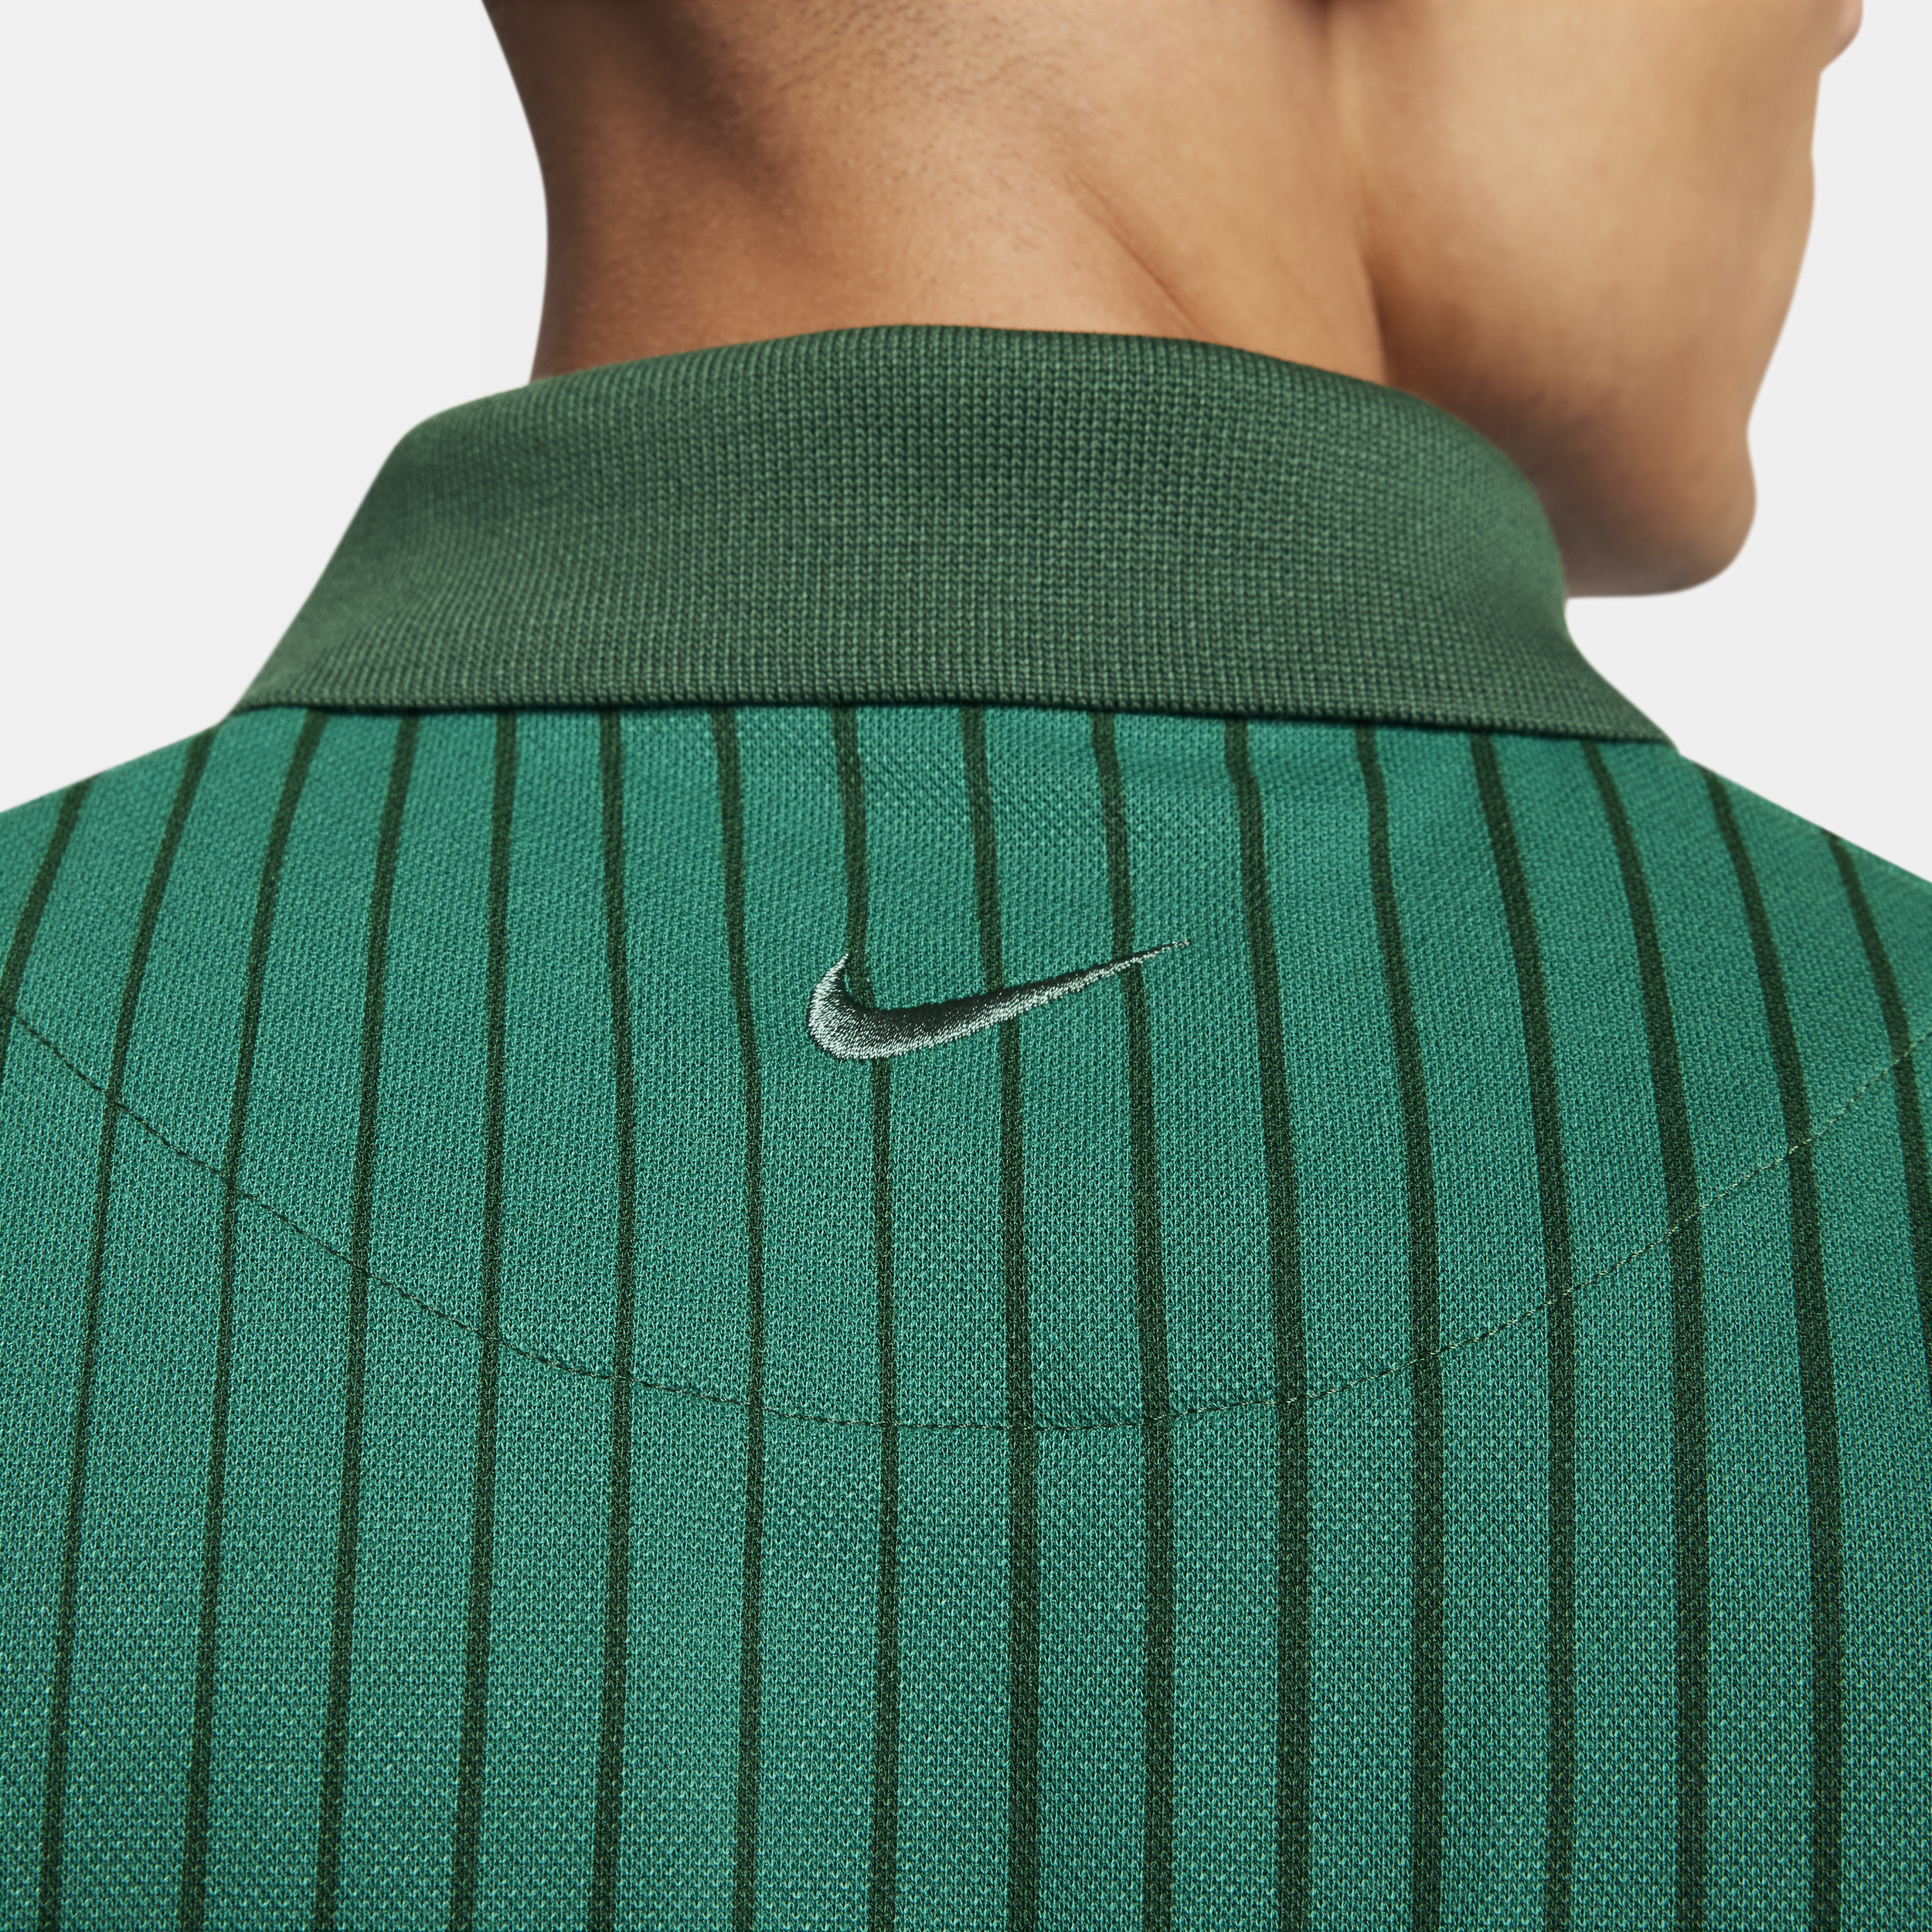 Nike The Polo Dri-FIT polo voor heren Groen